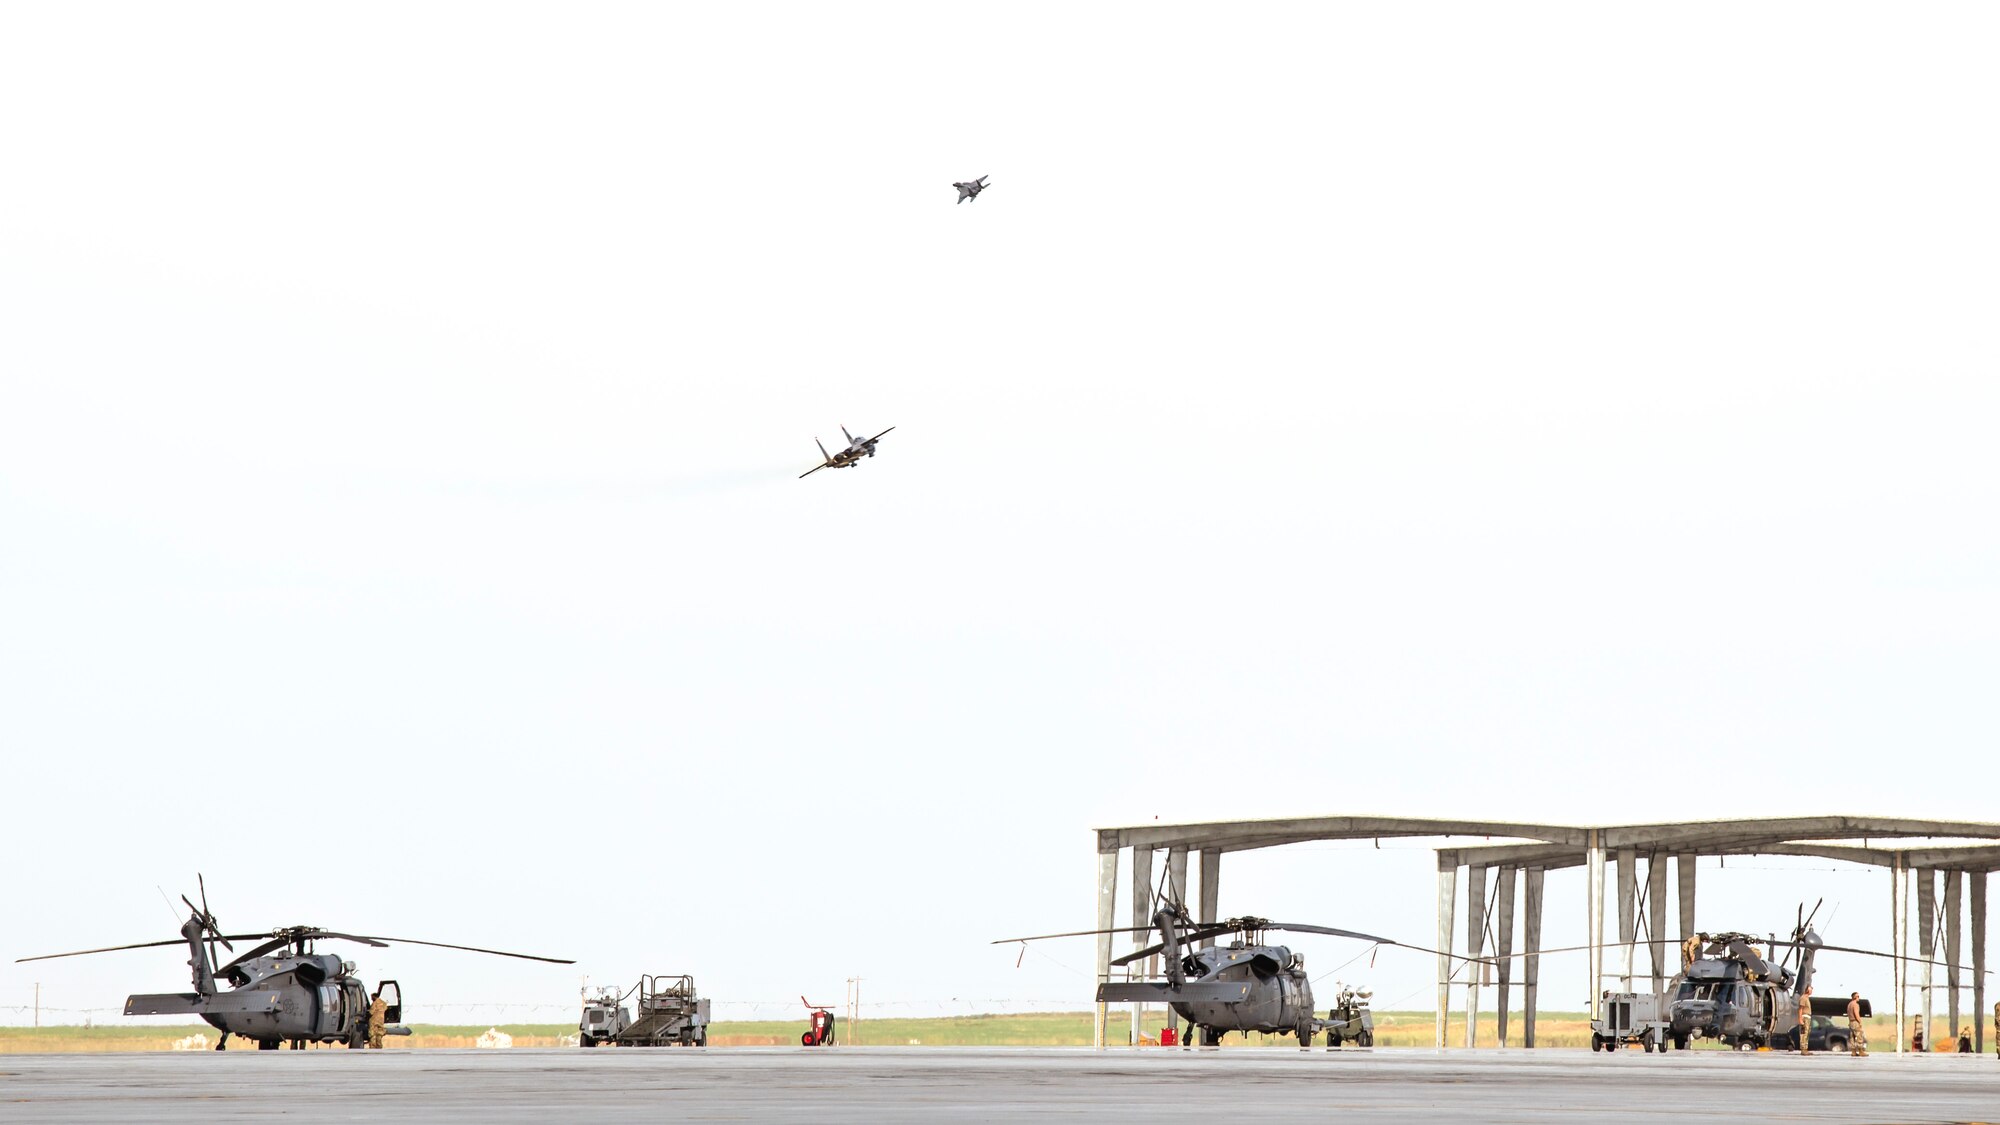 U.S. Air Force F-15E strikes eagles take-off while three HH-60G Pave Hawks standby Aug. 17, 2020, at Mountain Home Air Force Base, Idaho. Both airframes are participating in Gunfighter Flag 20-1, which aims to hone joint and multi-national armed forces to become more agile and lethal. (U.S. Air Force photo by Airman 1st Class Andrew Kobialka)